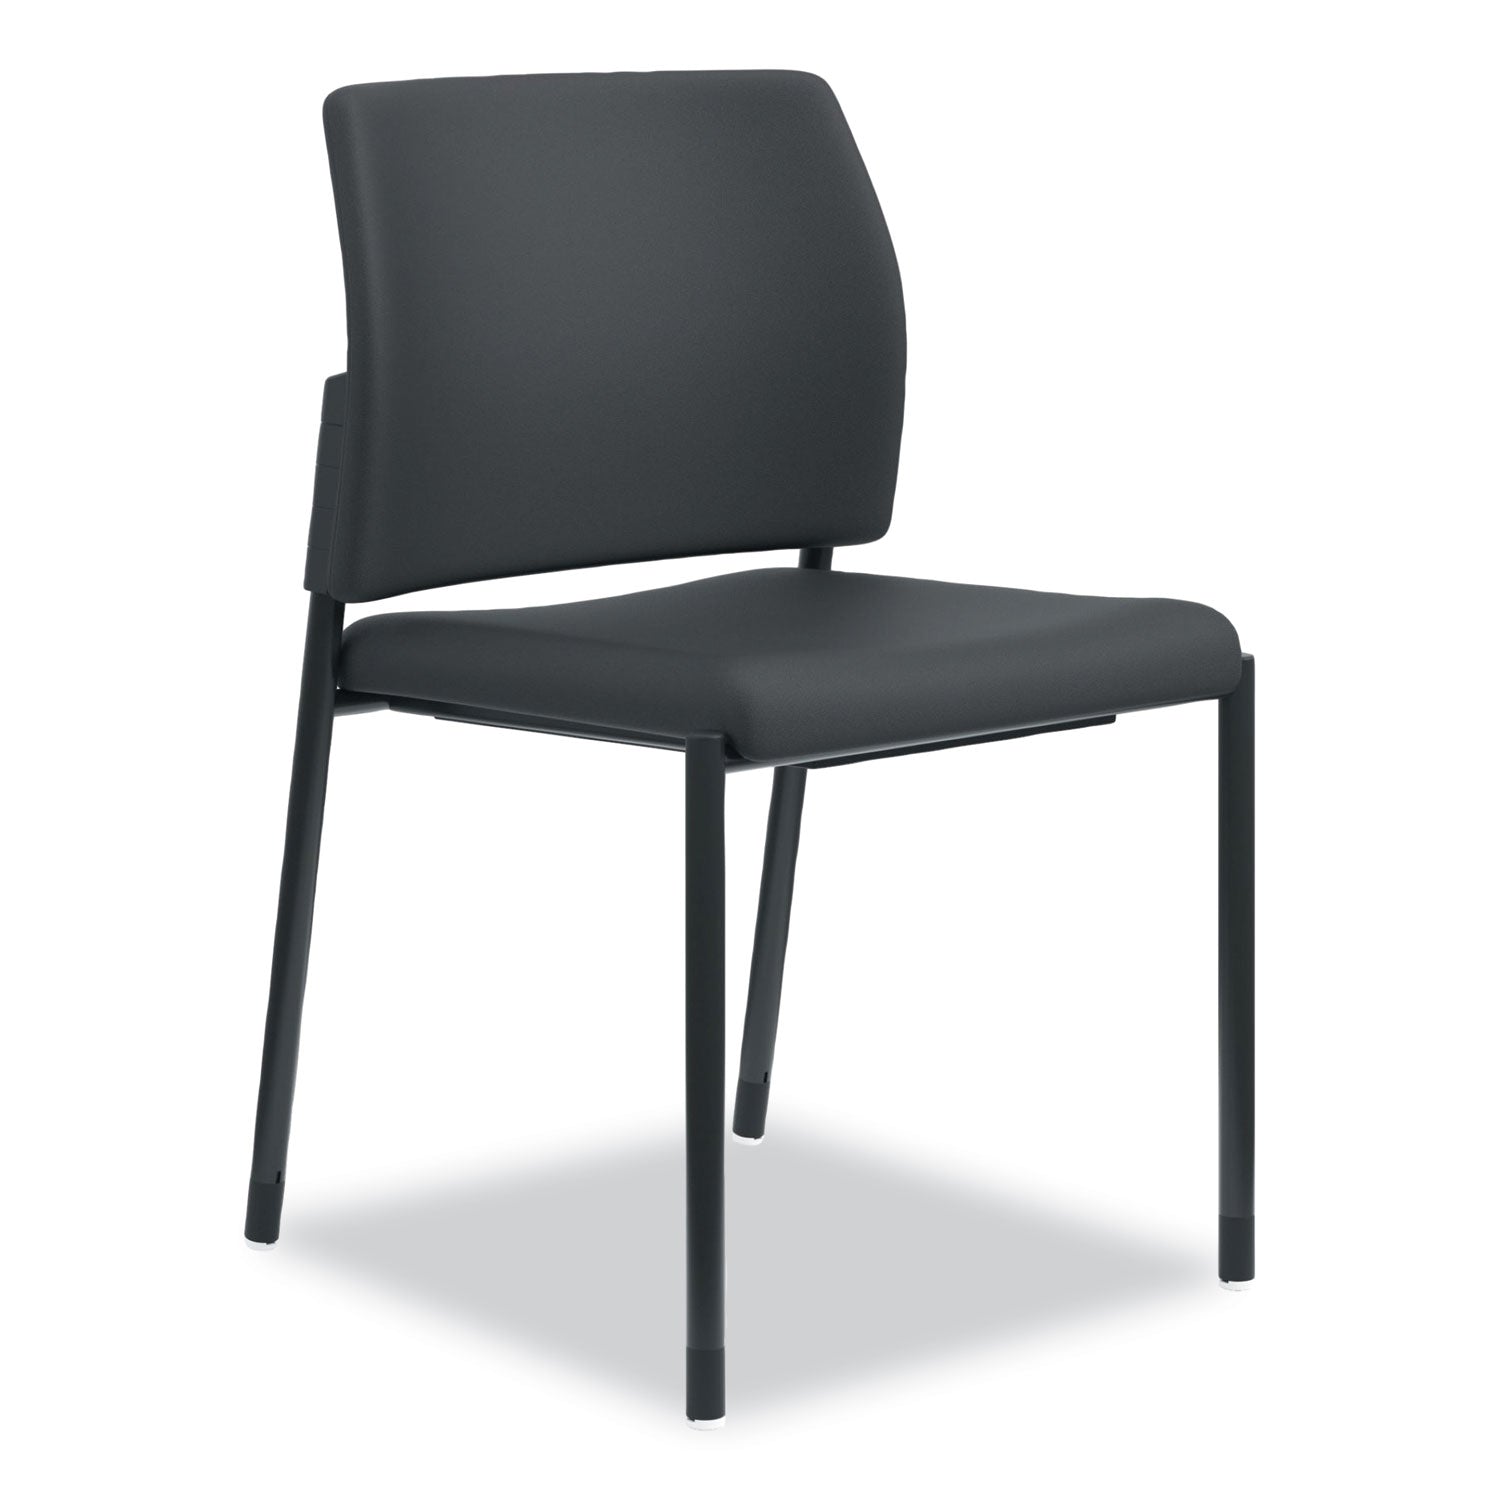 accommodate-series-guest-chair-fabric-upholstery-235-x-2225-x-315-black-seat-back-textured-black-base-2-carton_honsgs6nbcu10ck - 1